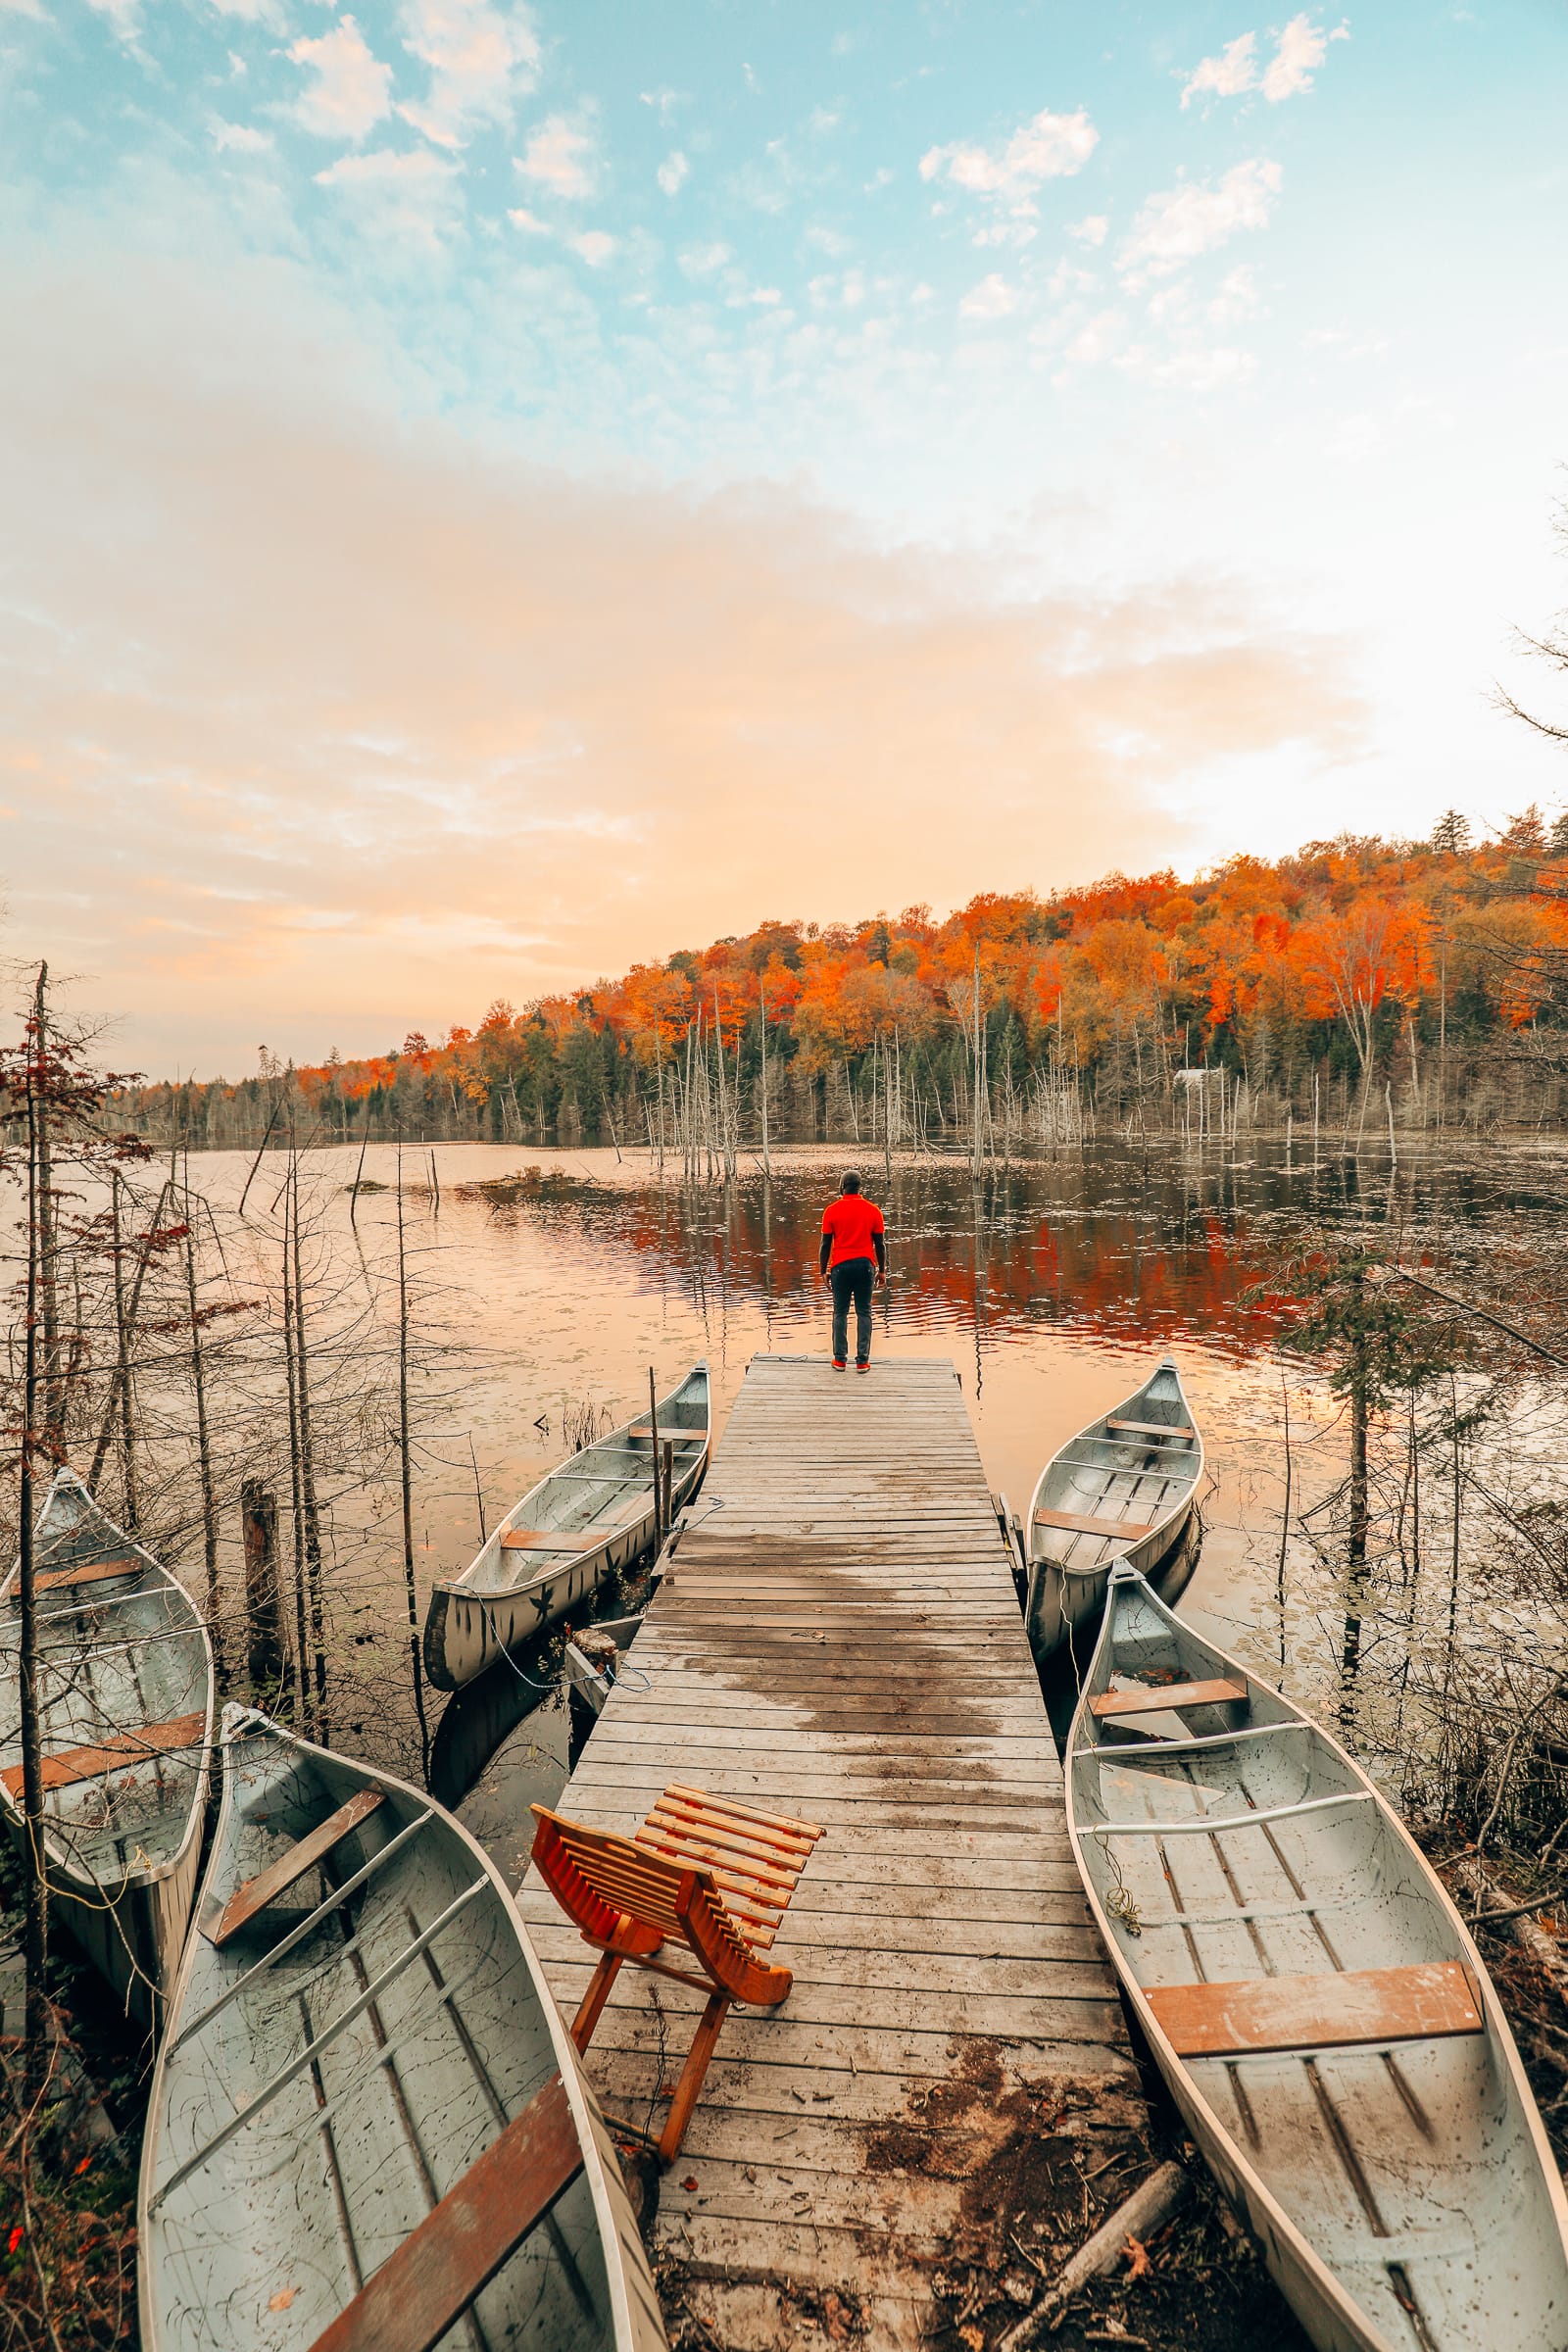 Getting Lost In Nature (And With Beavers) In Quebec, Canada (33)